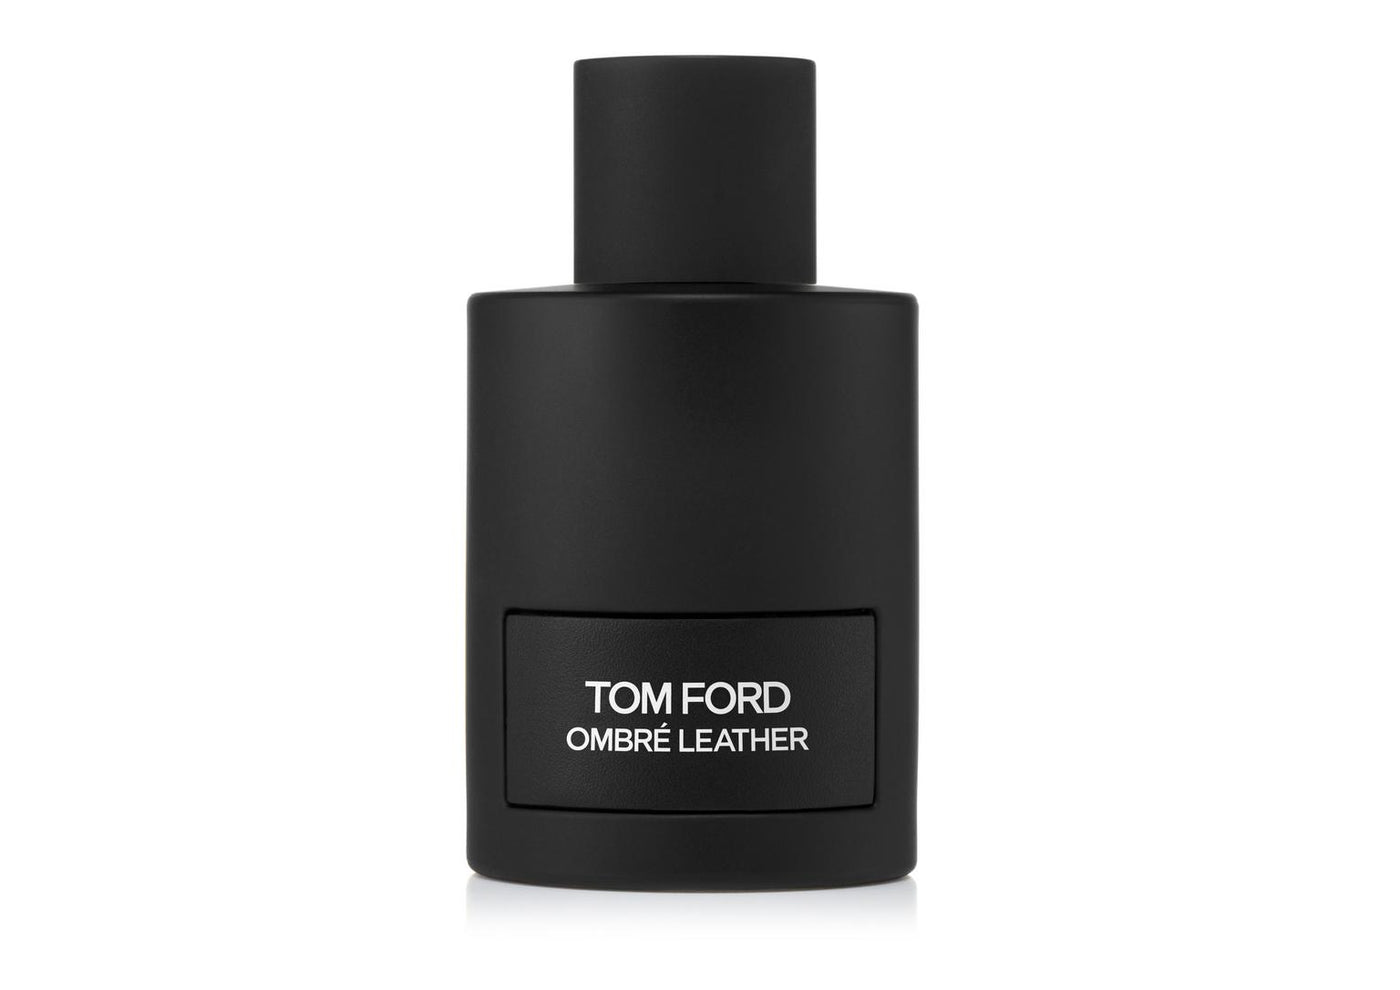 Tom Ford Ombre Leather Eau Da Pafrum 